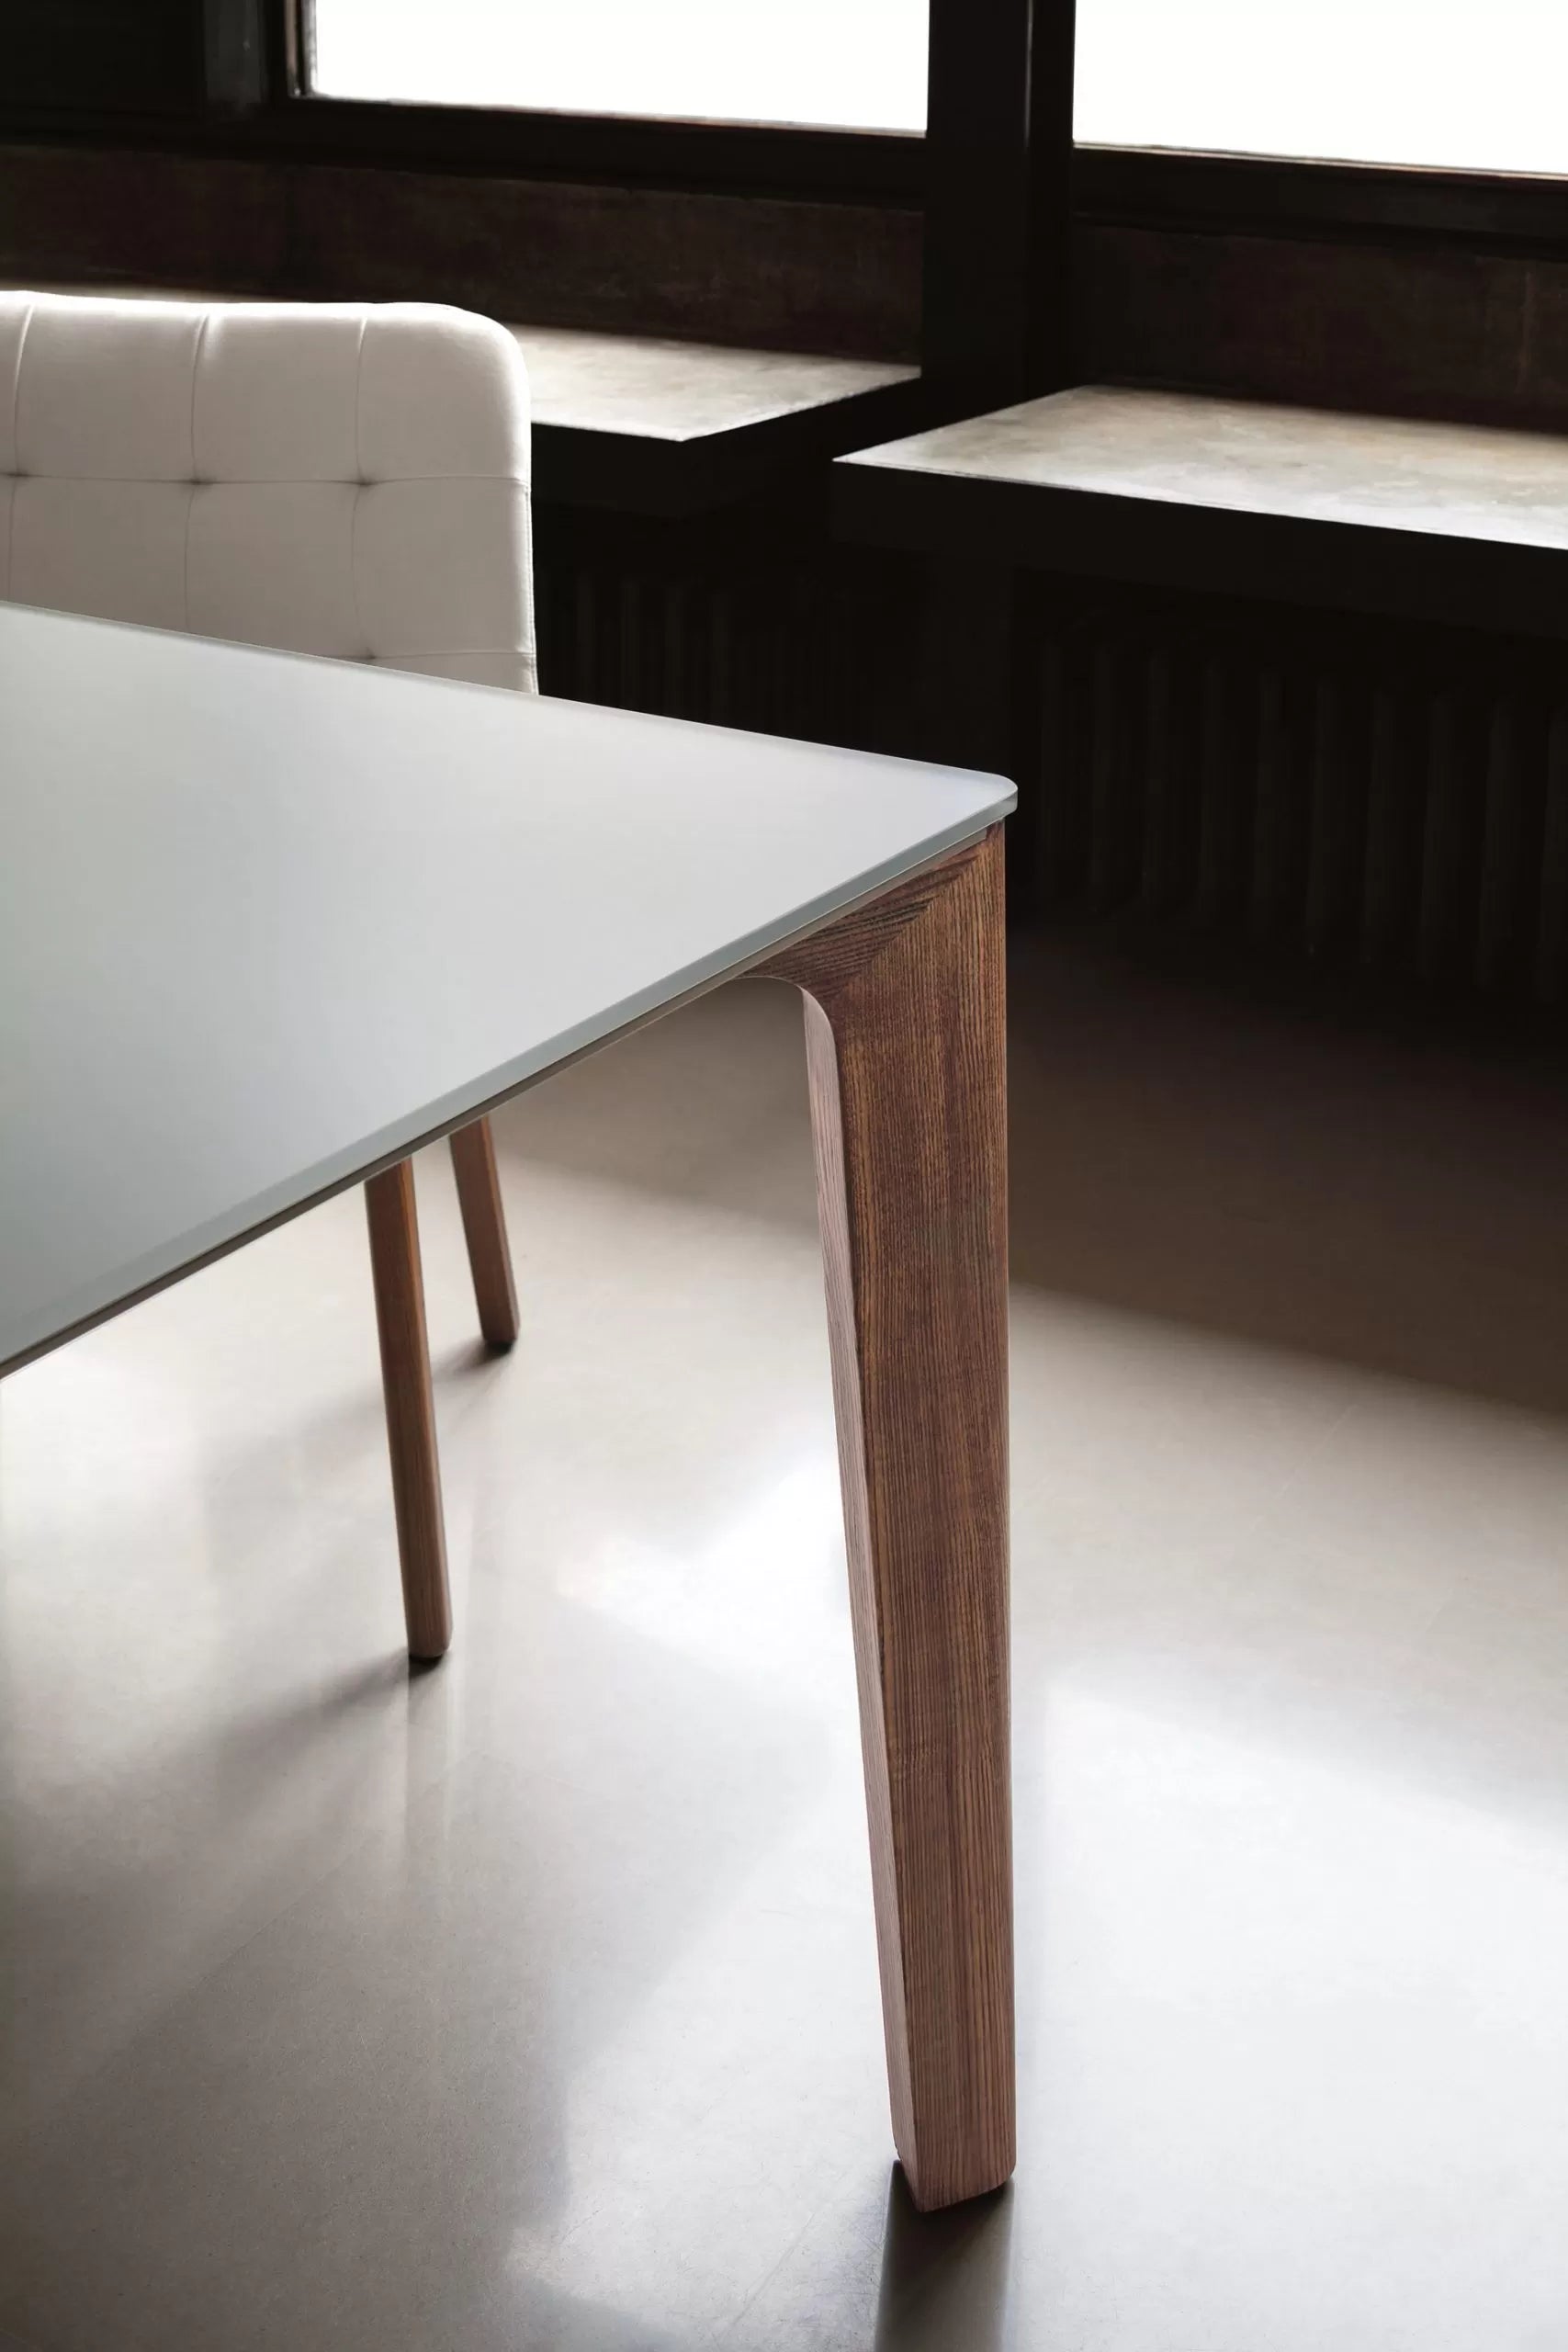 Versus Fixed table with Metal frame in matching colours with top finishing